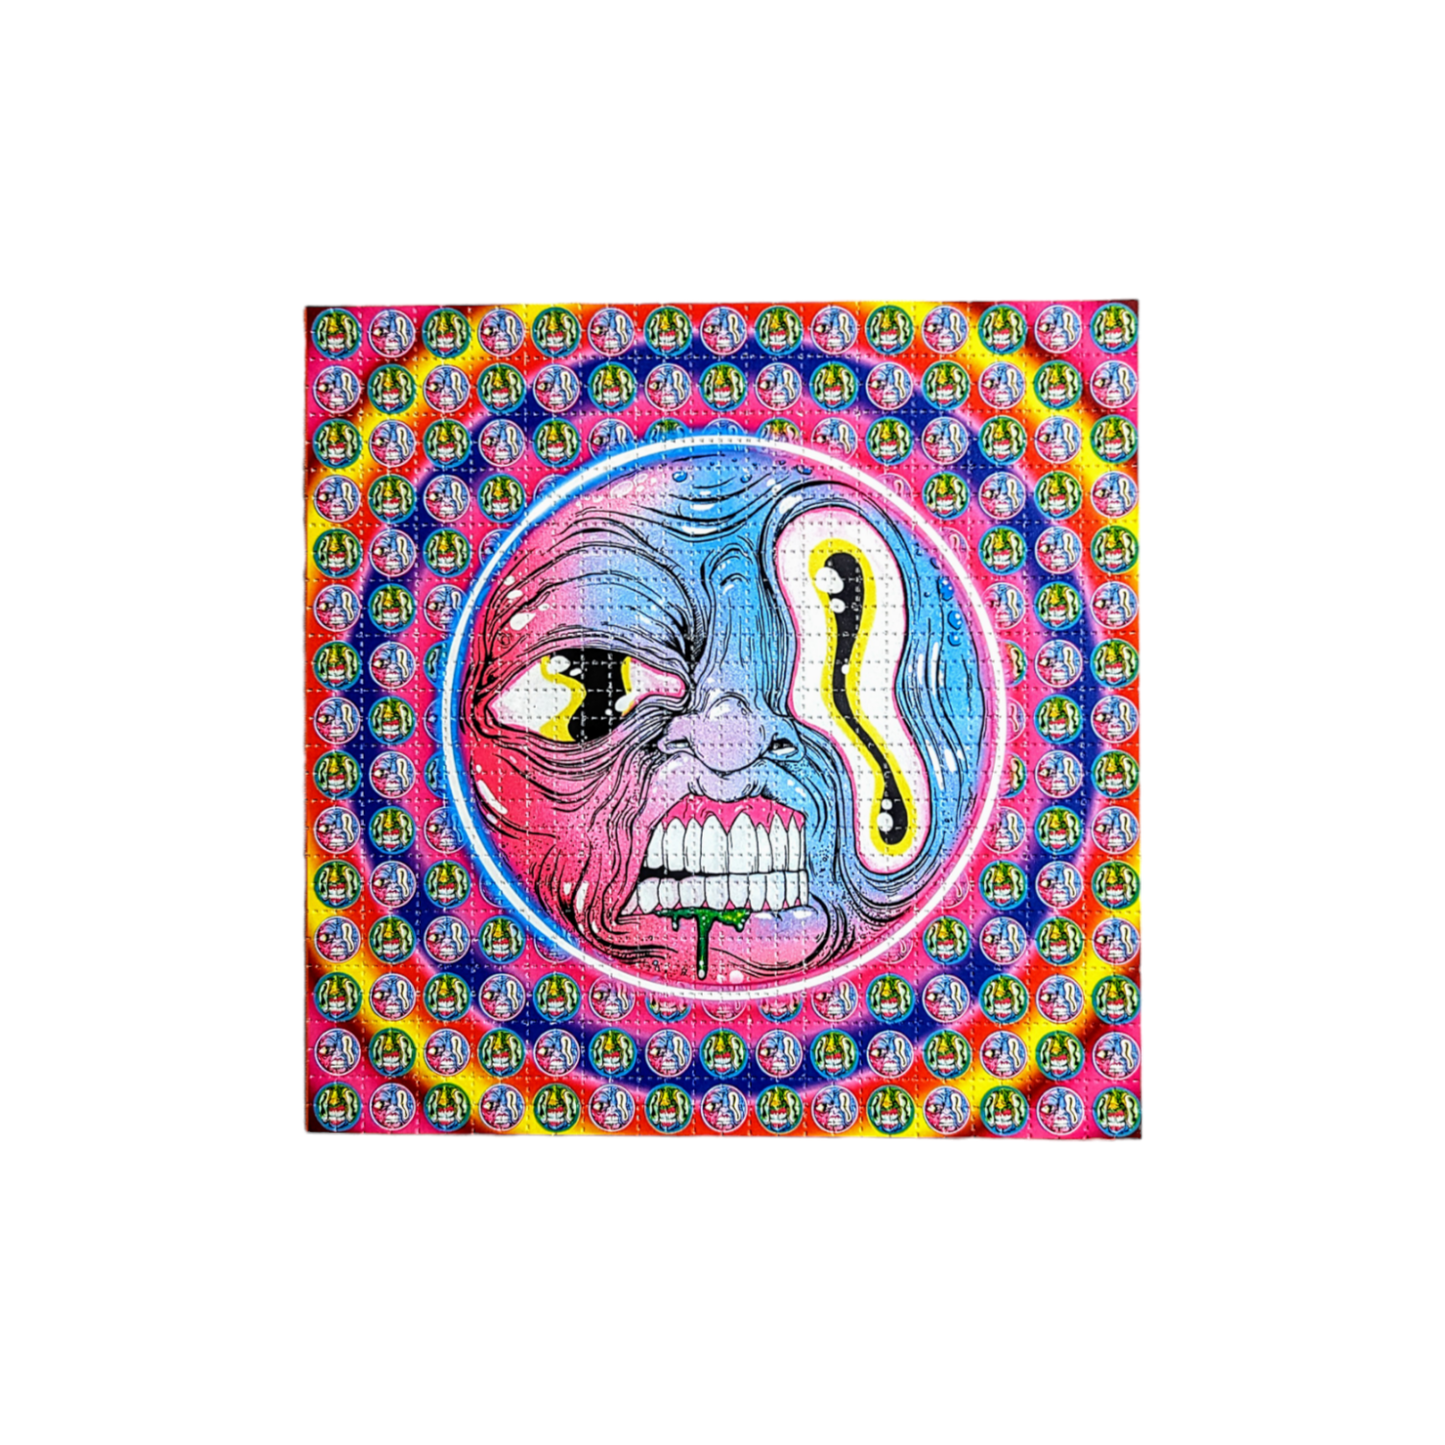 Aaron Brooks  Wonk Eye, 2023 Print on Blotter Paper 7.5 x 7.5 in Edition of 100  Hand Signed + Numbered by the artist. 